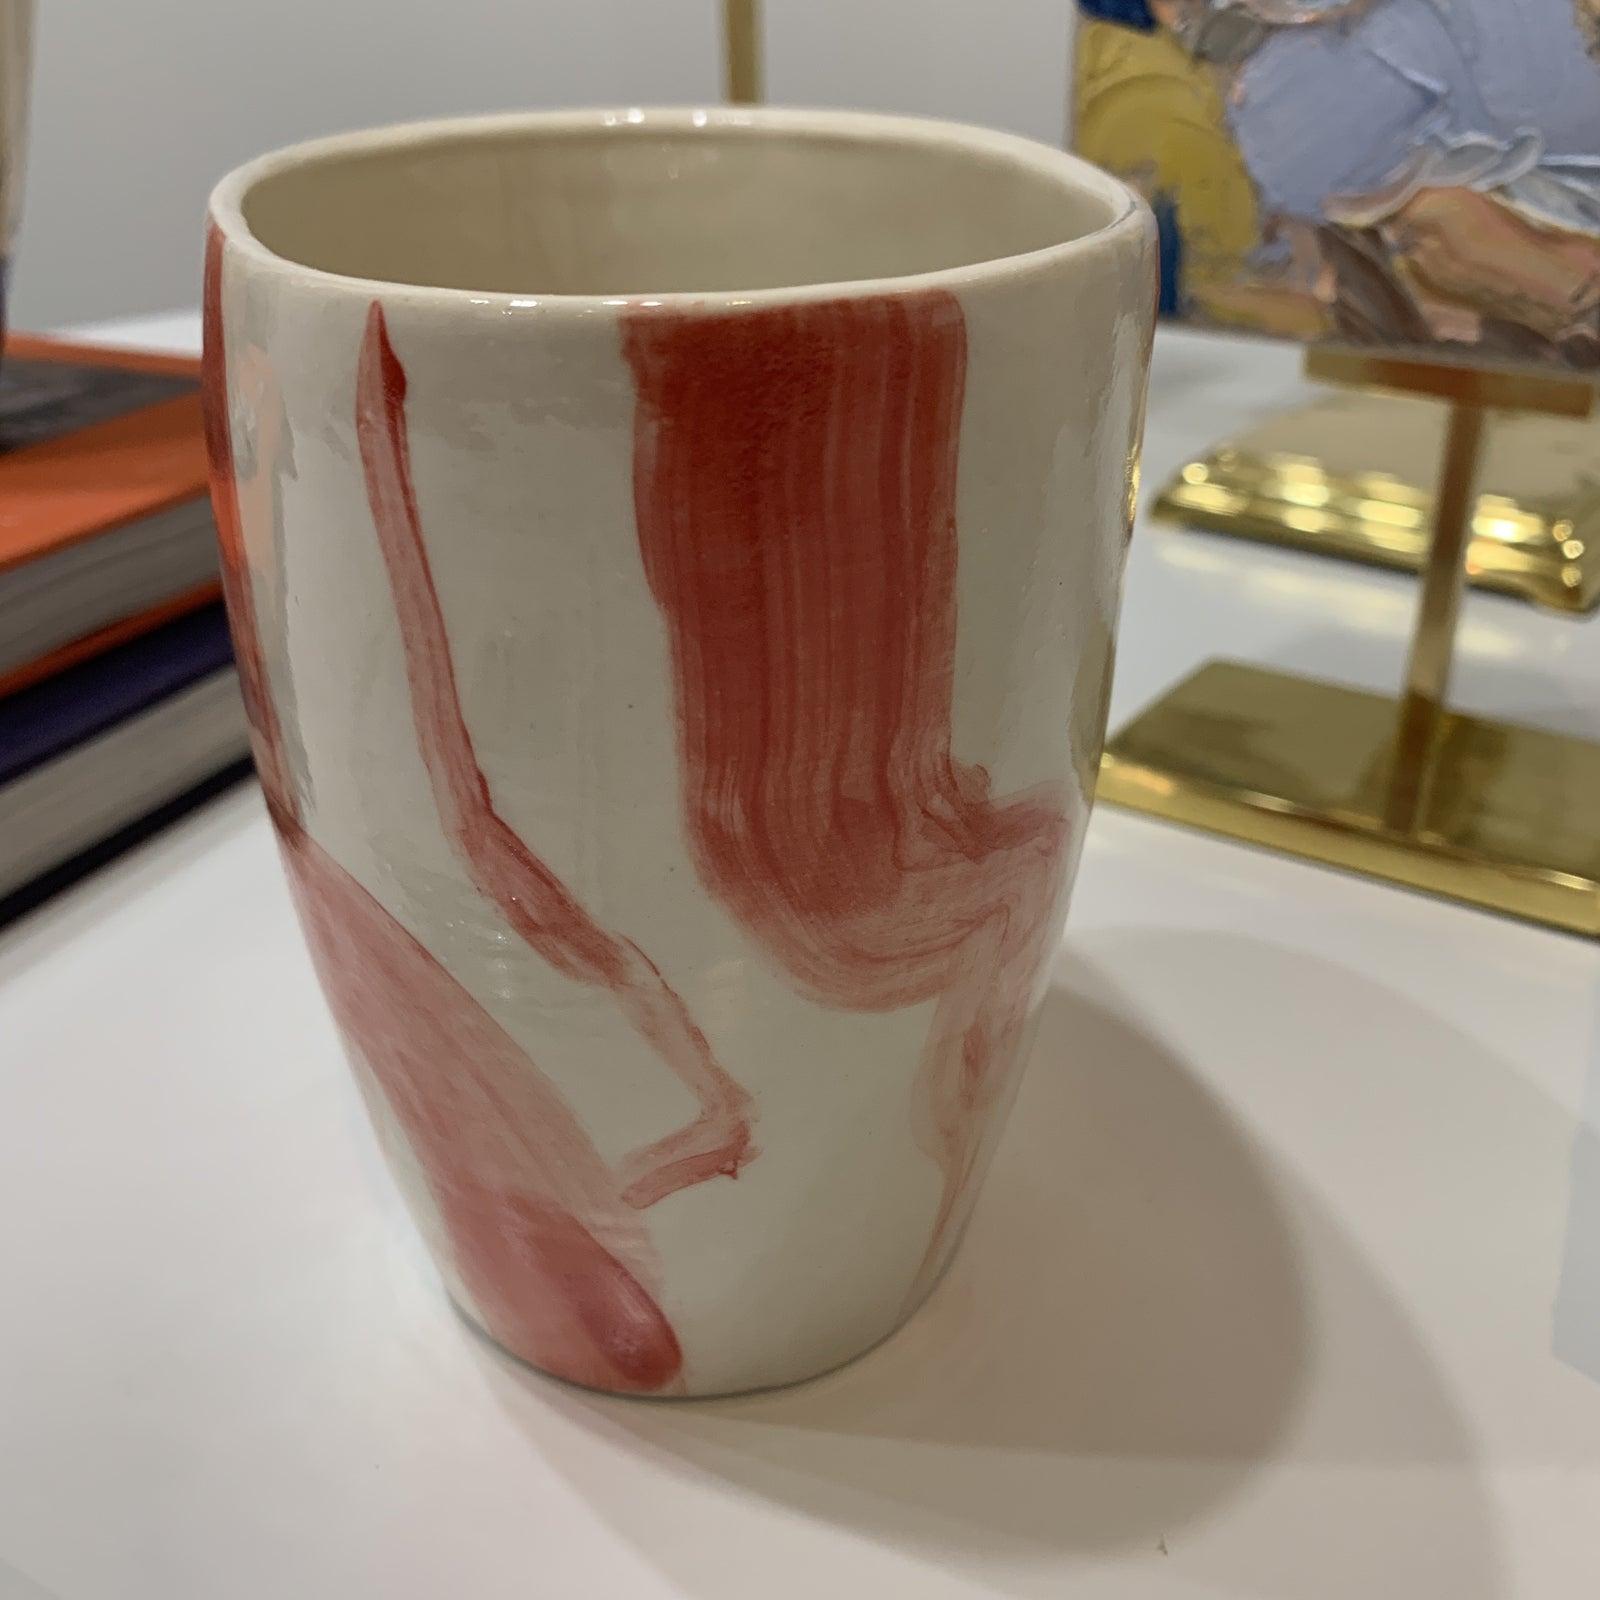 Ceramic Handpainted Vase by artist, Stephanie Wheeler 
Rich Coral Red and White 

Bio:
Somewhere between impressionism and abstraction, Stephanie Wheeler’s paintings take on a life of their own. She began her career in Atlanta as a classic painter